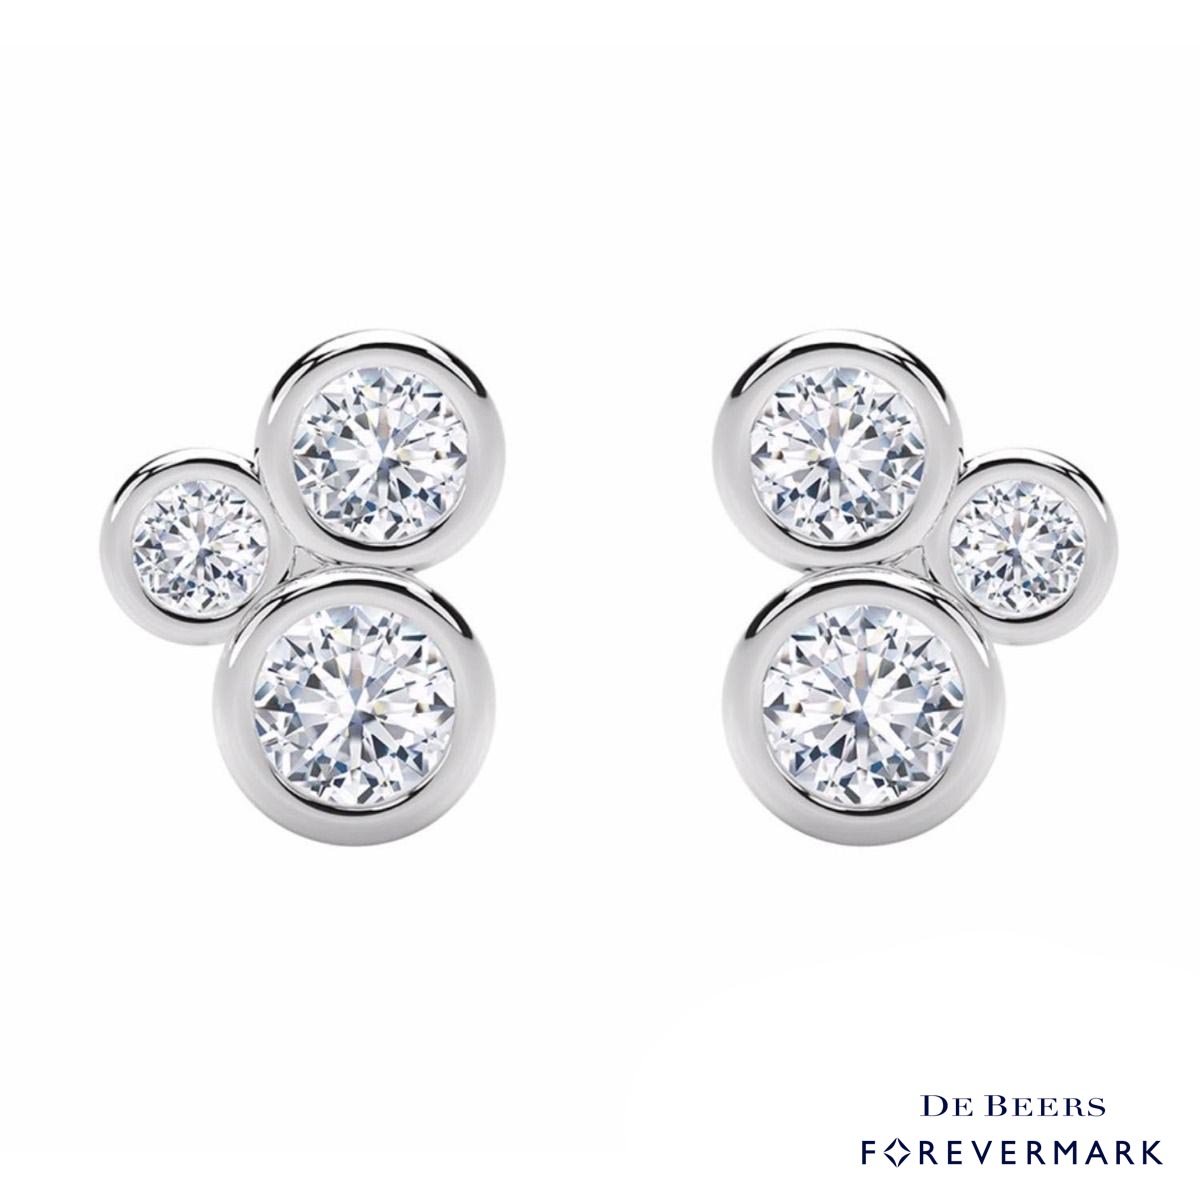 De Beers Forevermark Tribute Collection Three Stone Bezel Diamond Stud Earrings in 18kt White Gold (1/2ct tw)